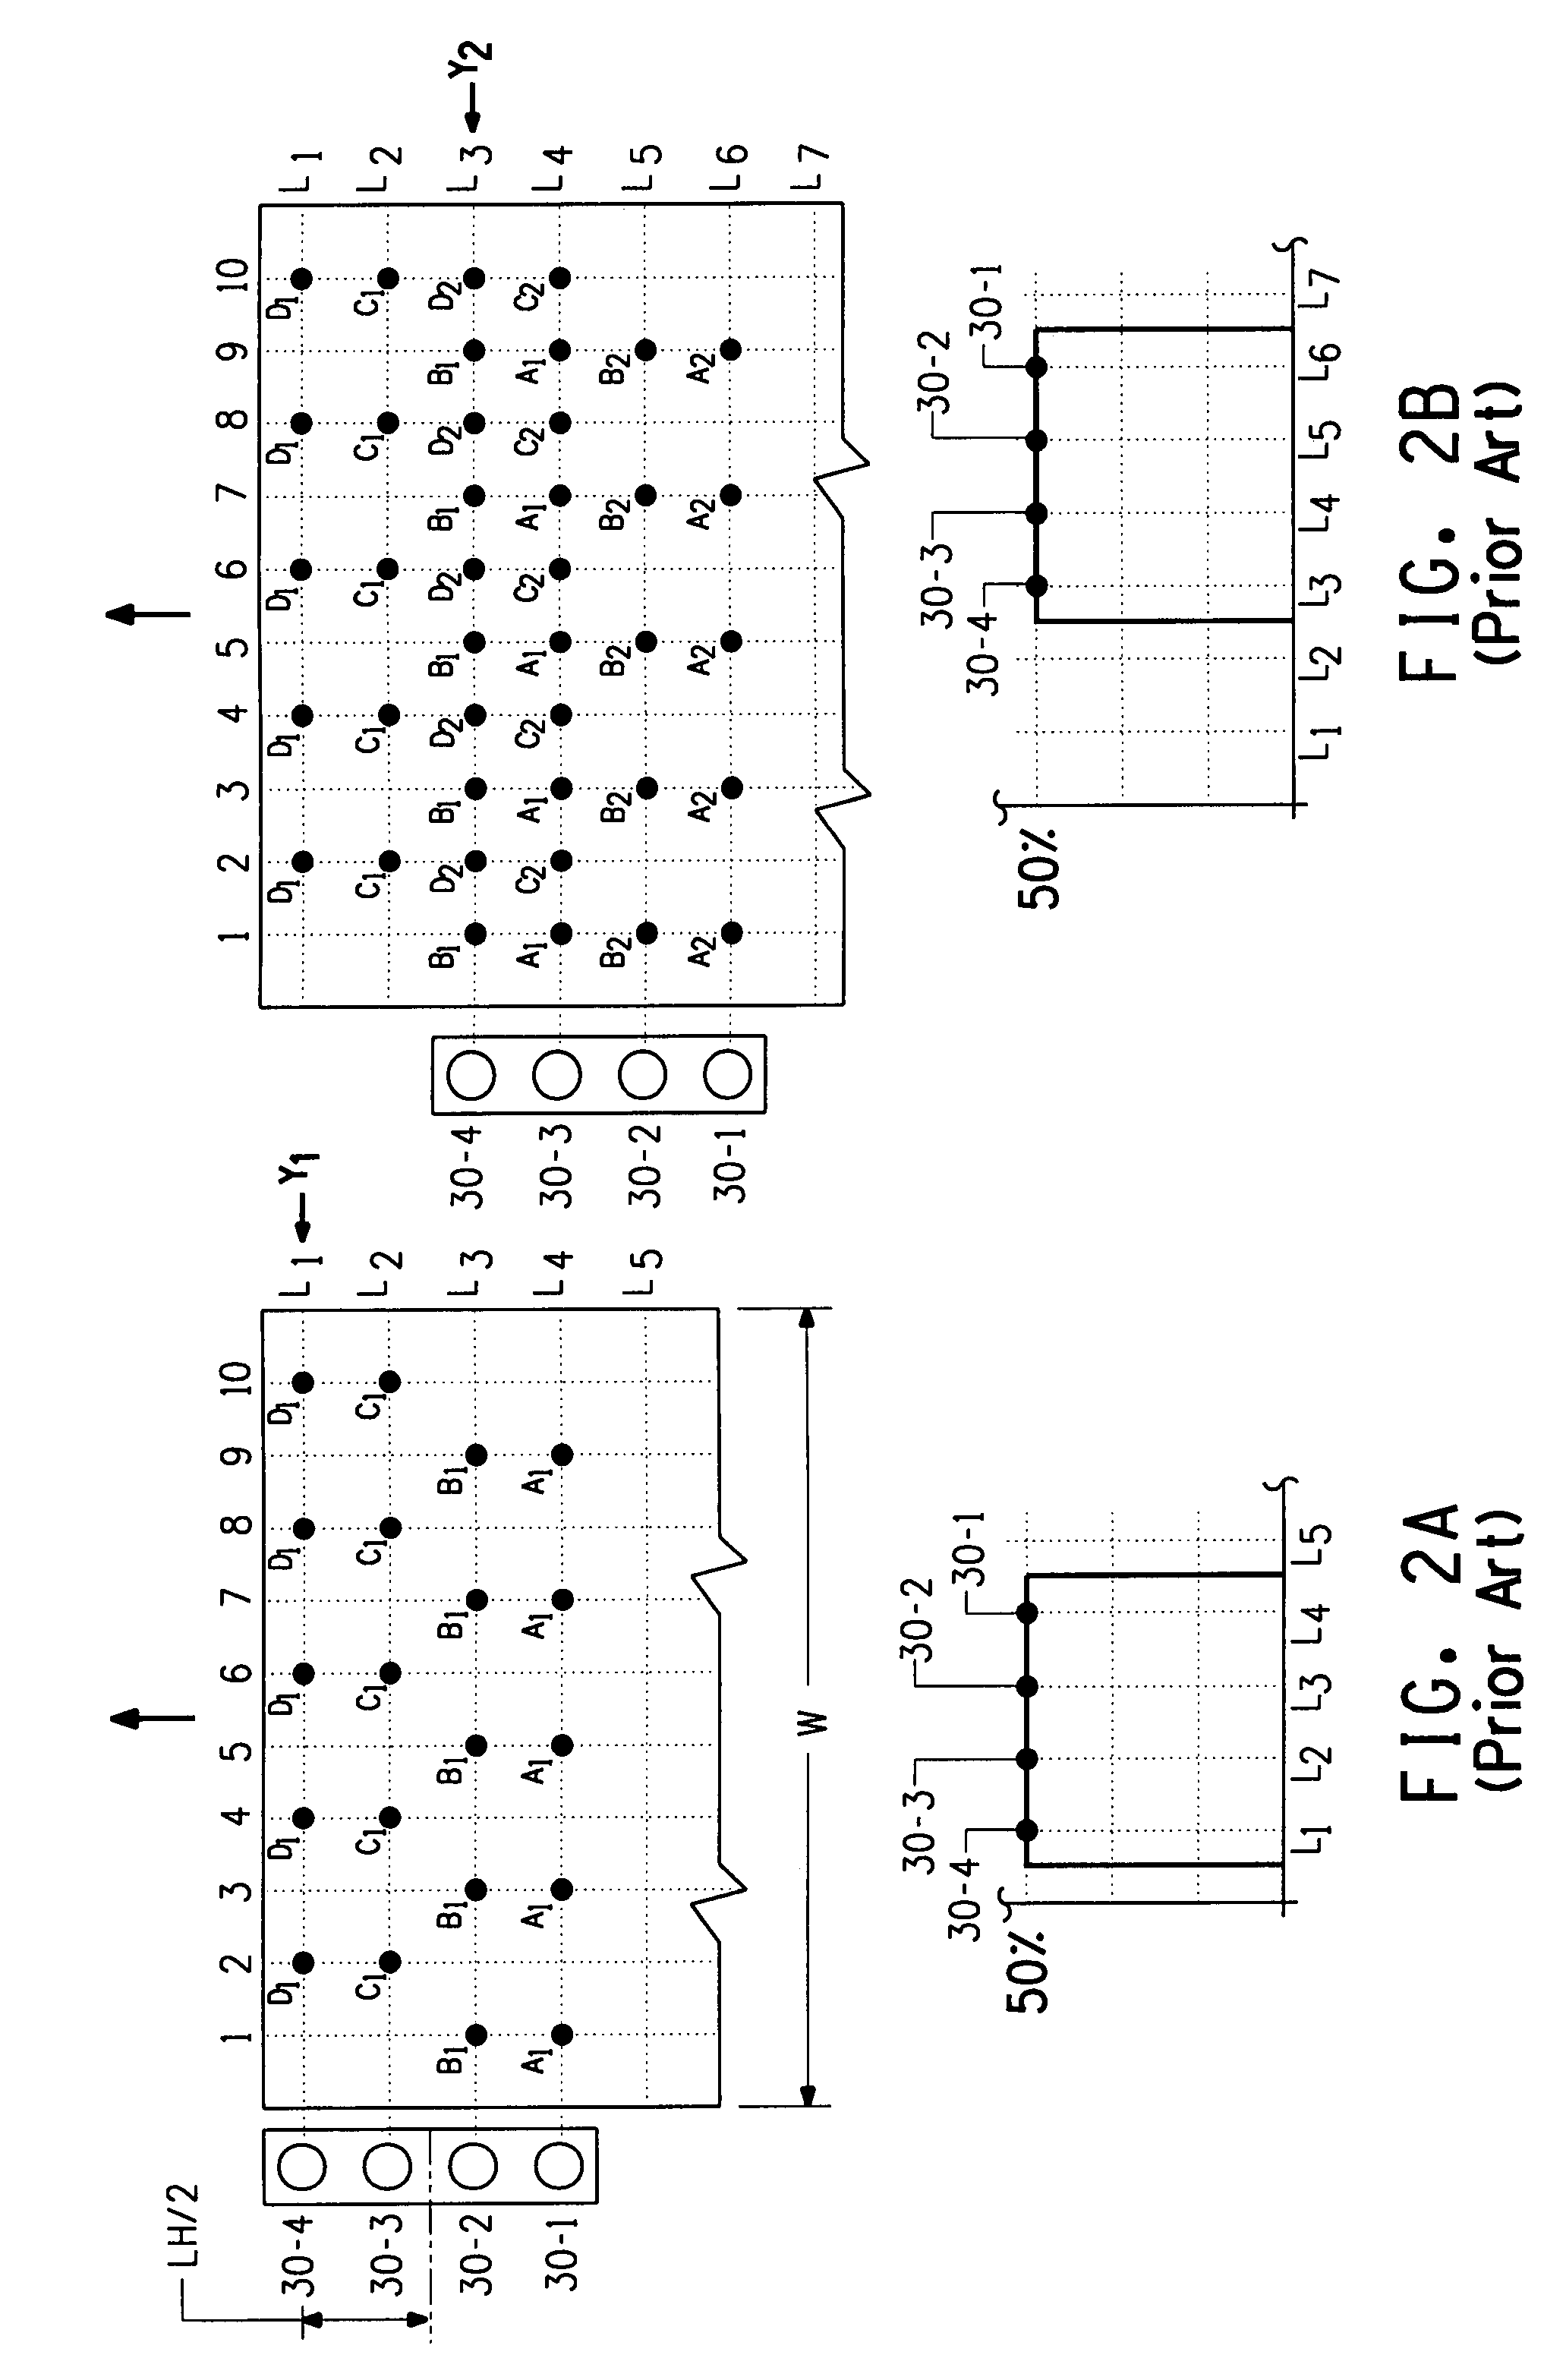 Ink jet printing apparatus having a programmed controller that minimizes banding artifacts